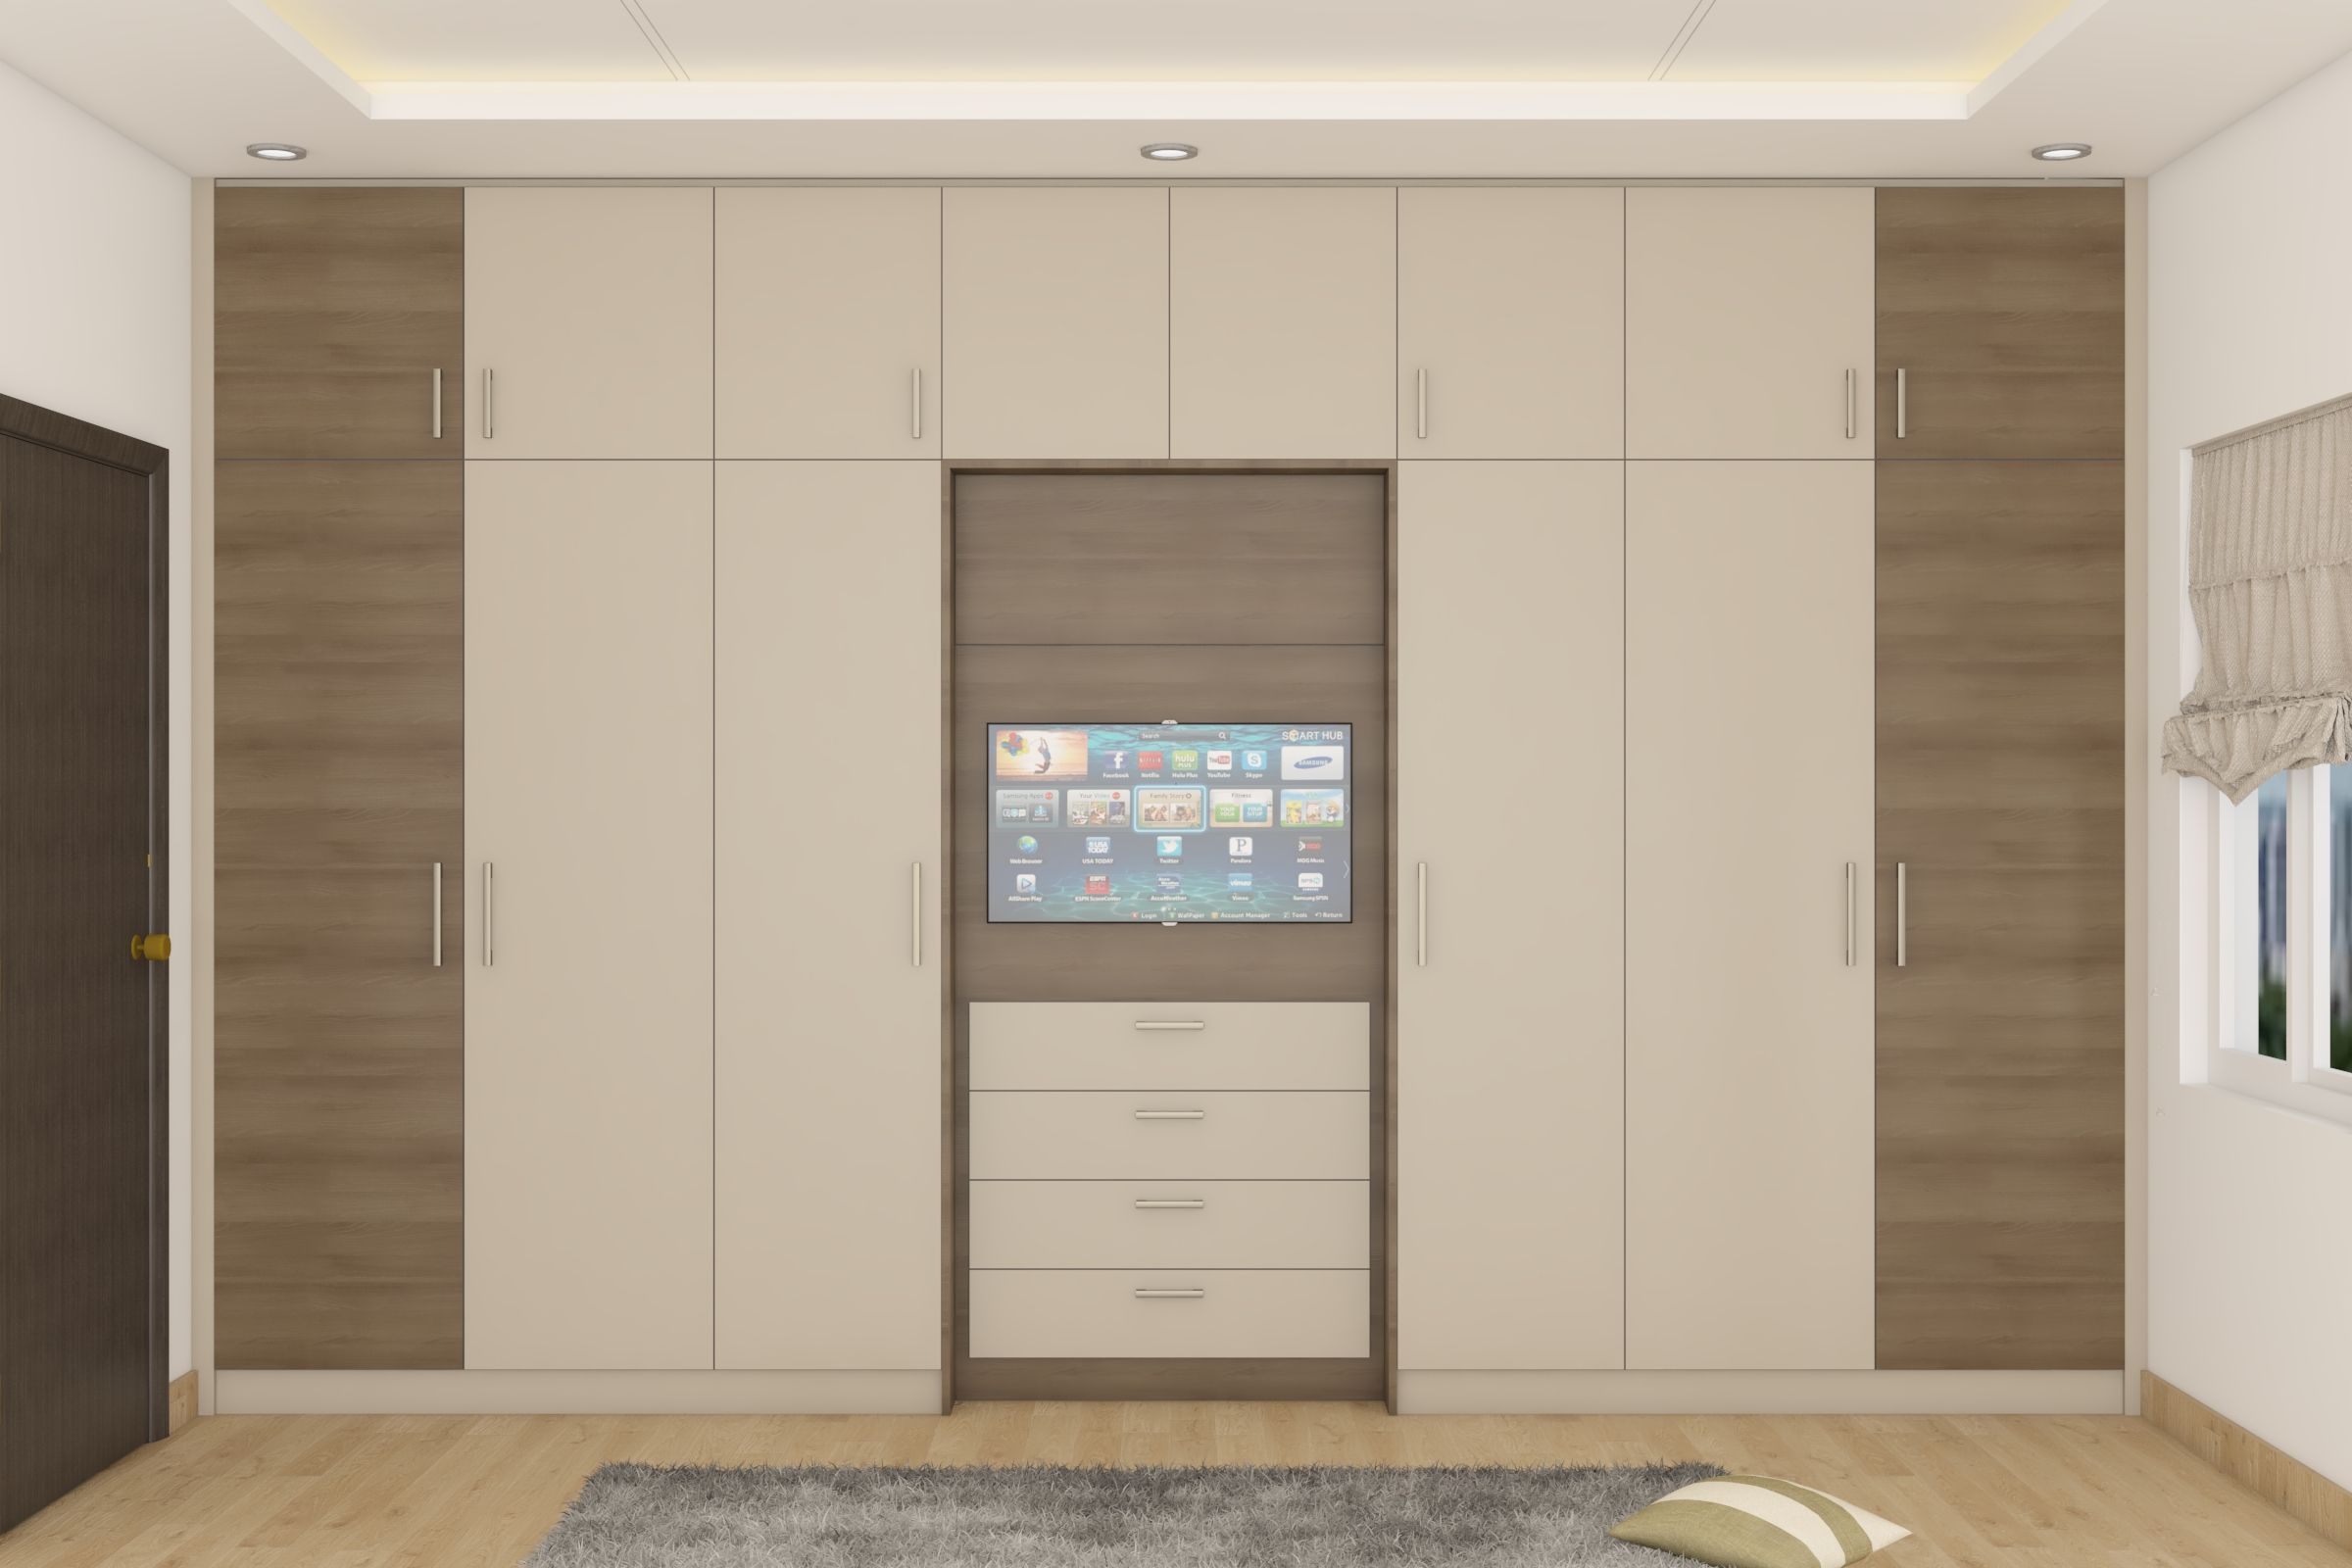 Spacious Swing Wardrobe Design With Media Section